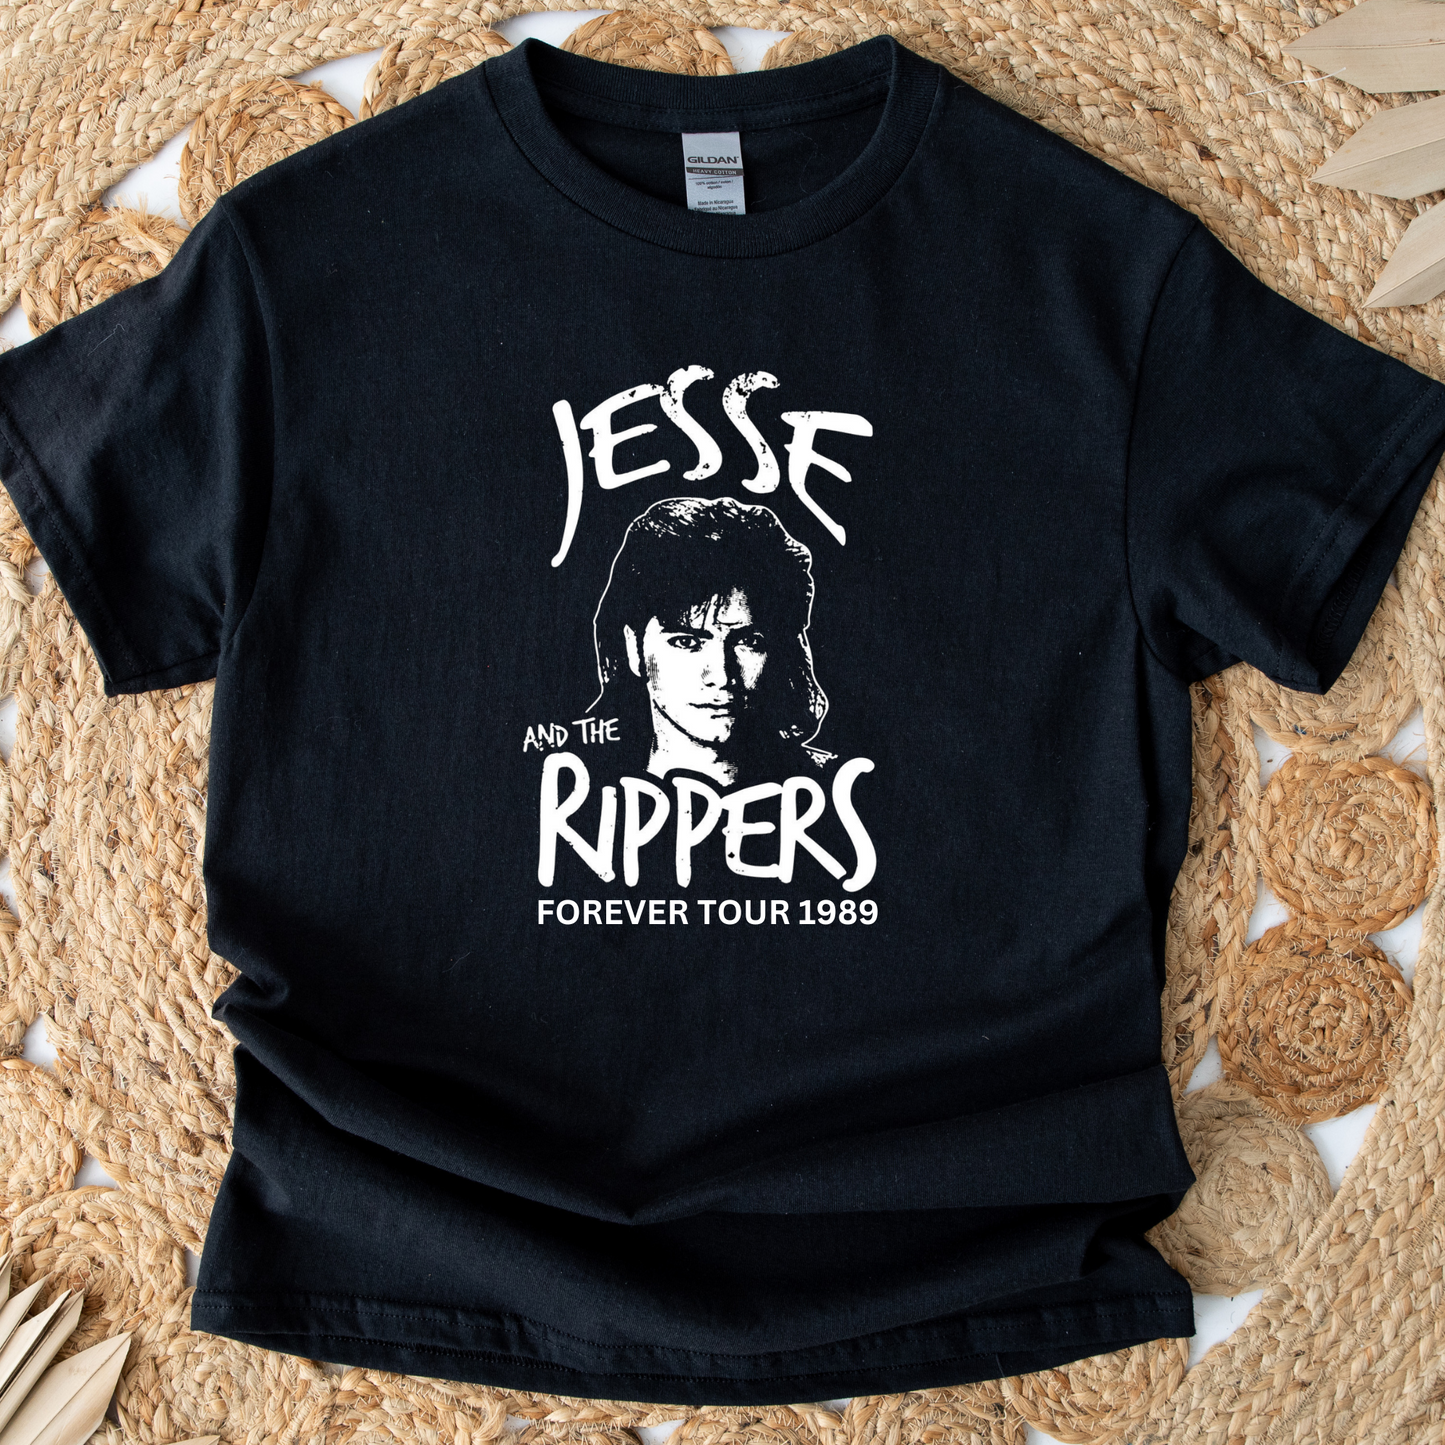 Jesse and the rippers